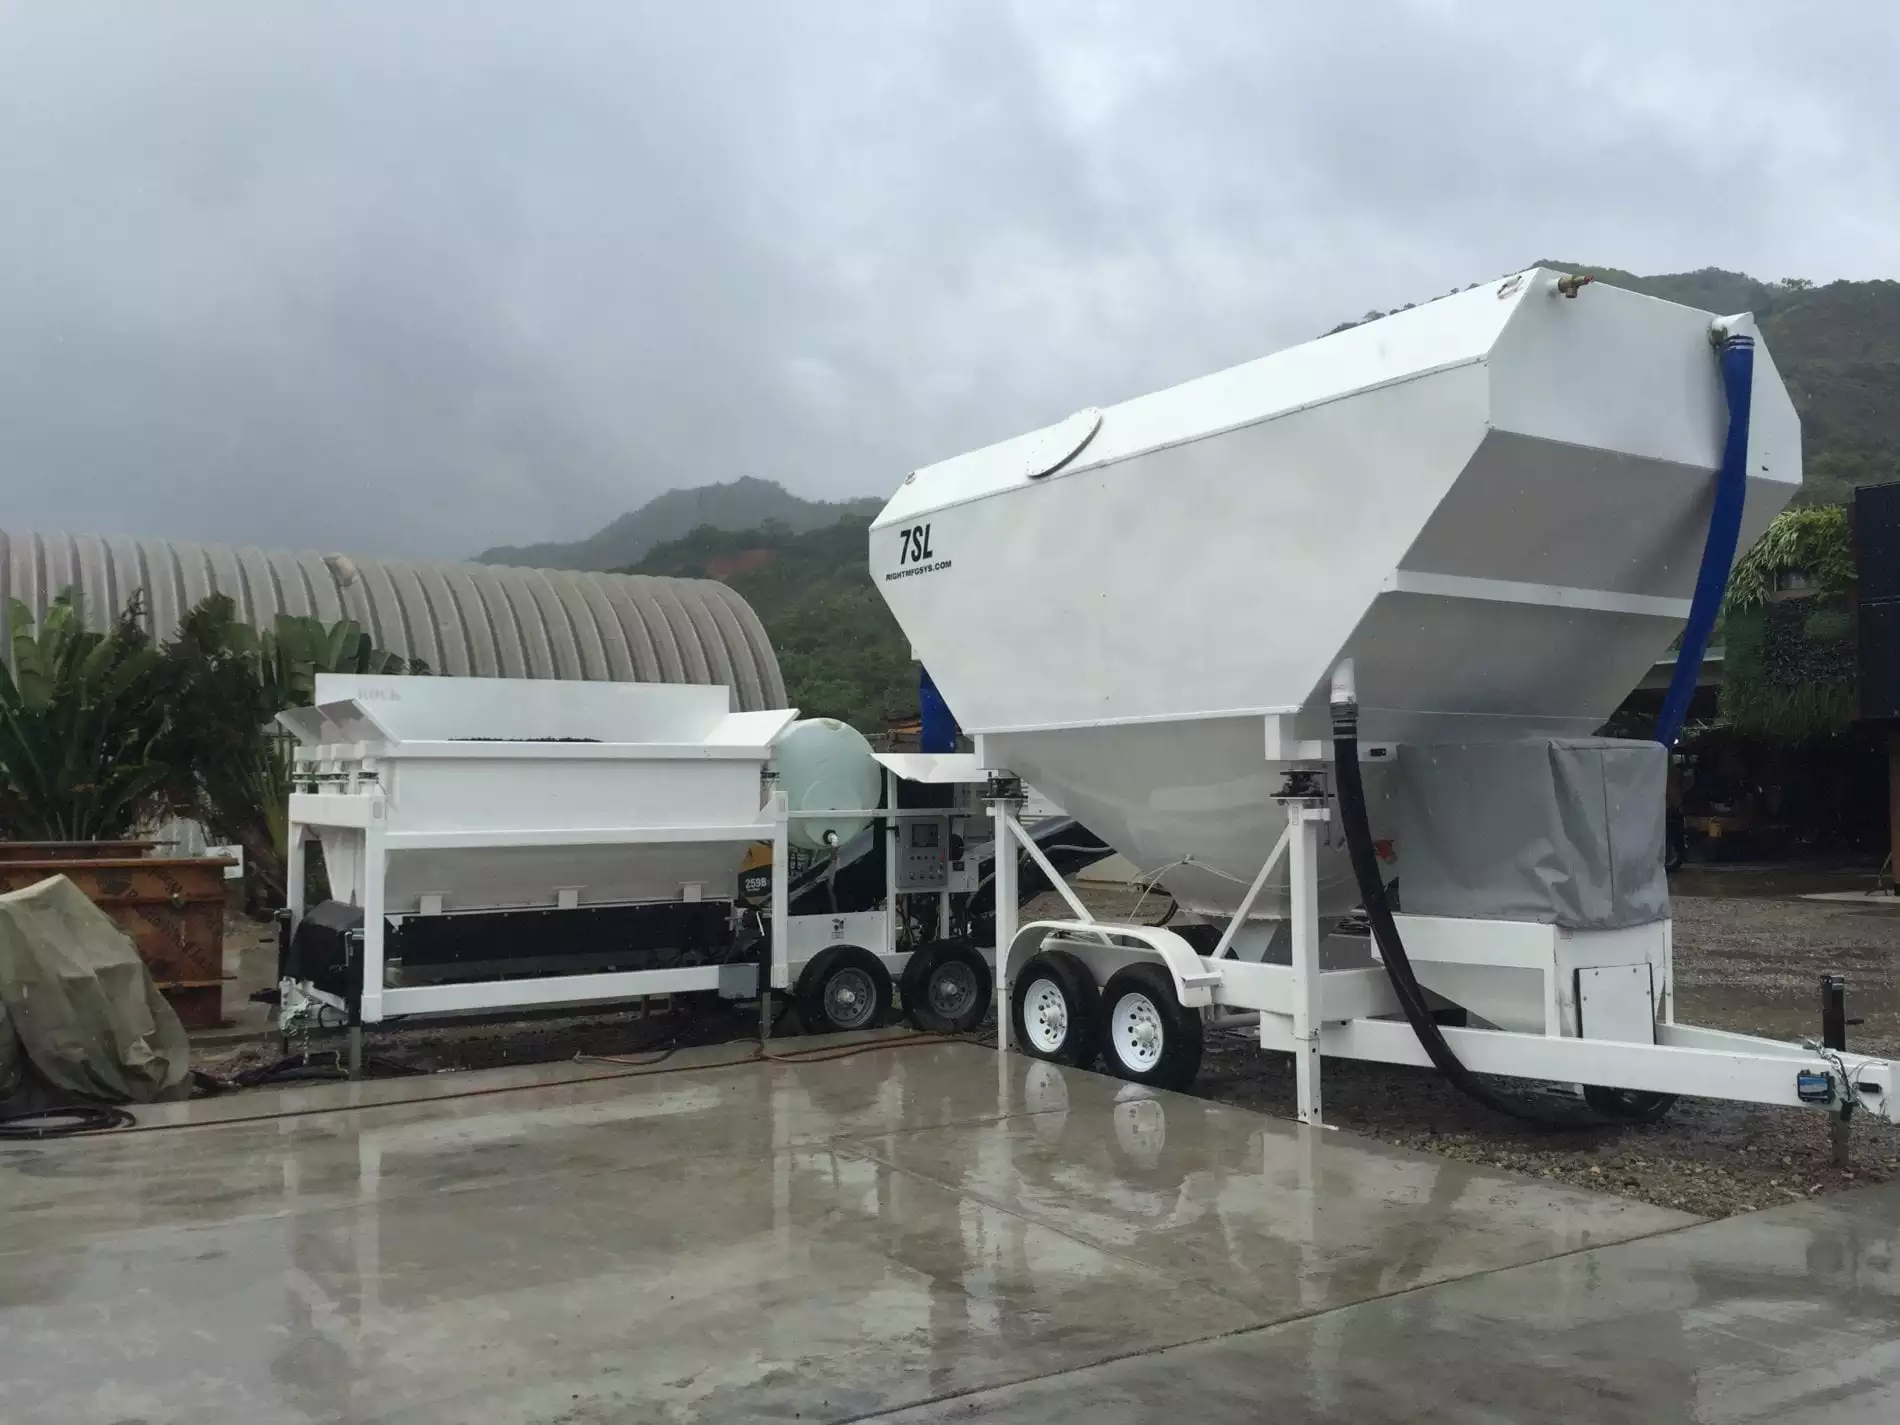 Portable Concrete Batching Plant 5+ Cubic Yards Automated Mix Right 2CL-5-2 & Portable Cement Silo 35 Ton 7SL-80 in Hawaii by Right Manufacturing Systems Inc.